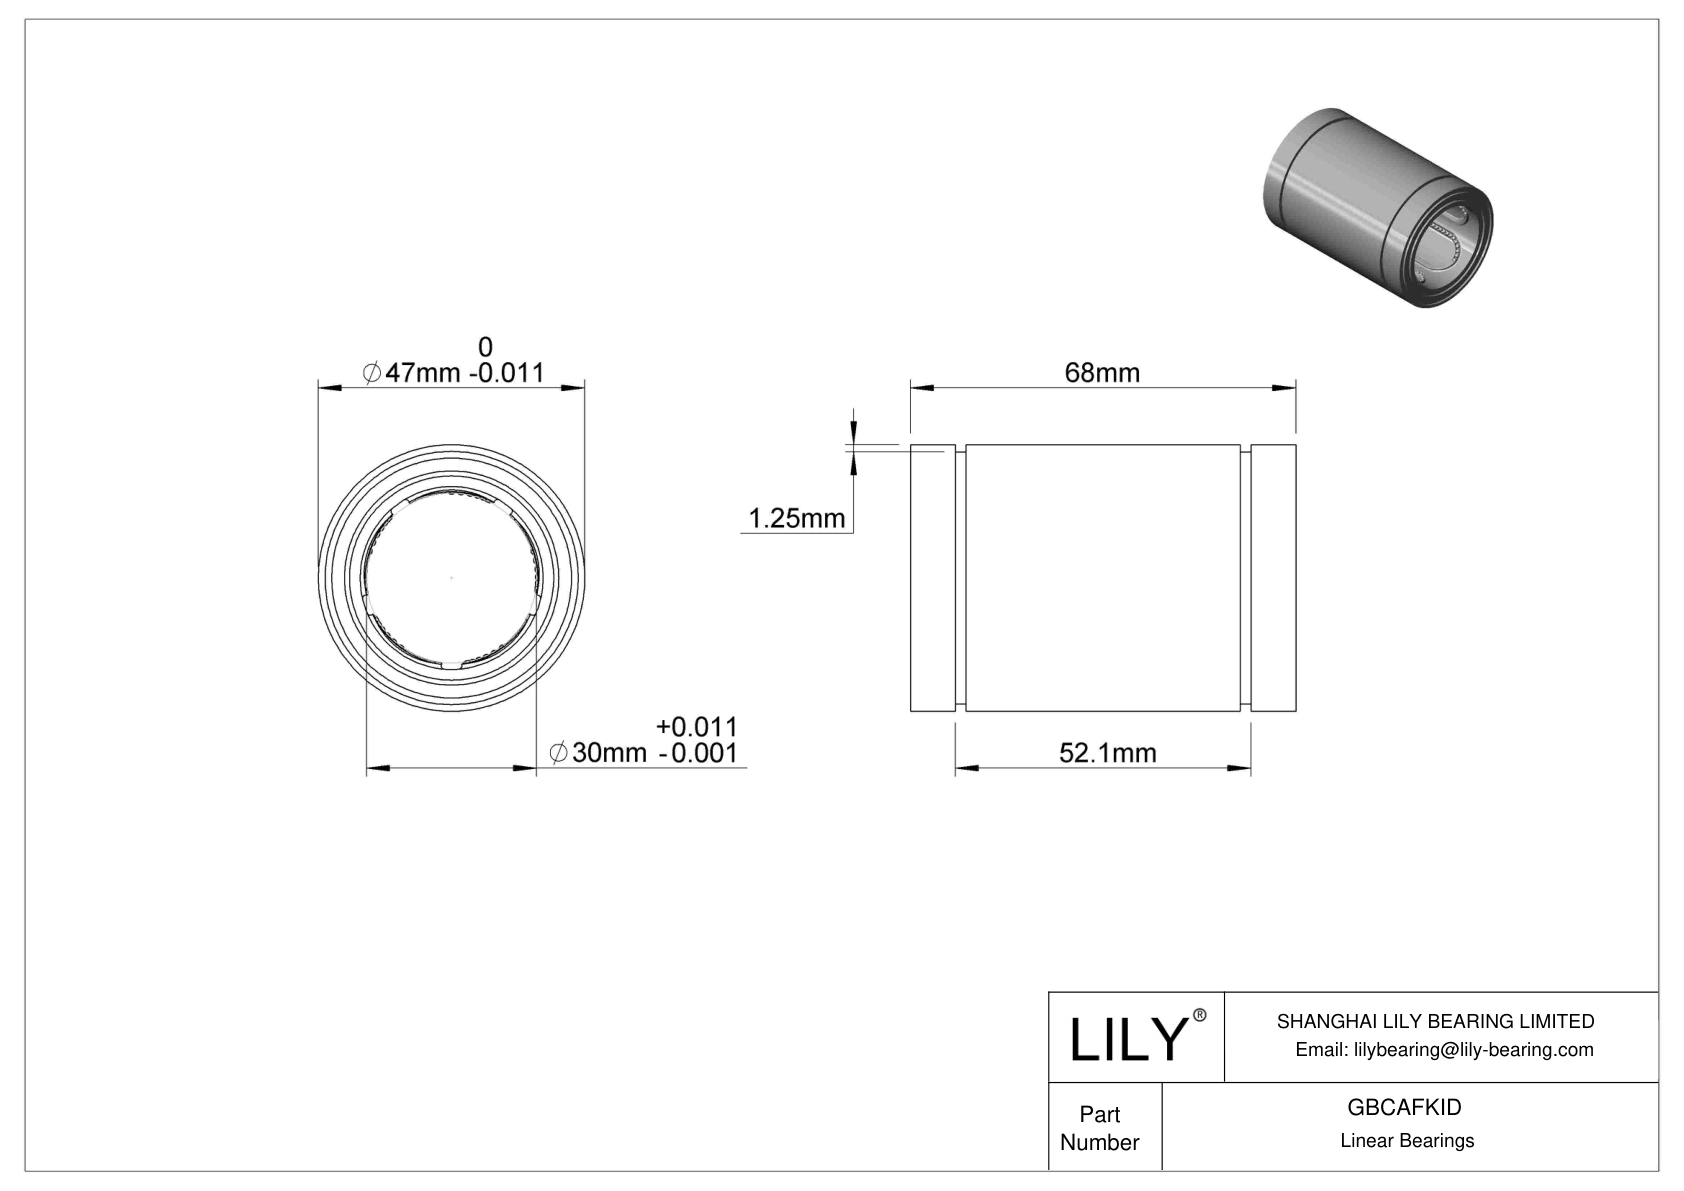 GBCAFKID Common Linear Ball Bearings cad drawing